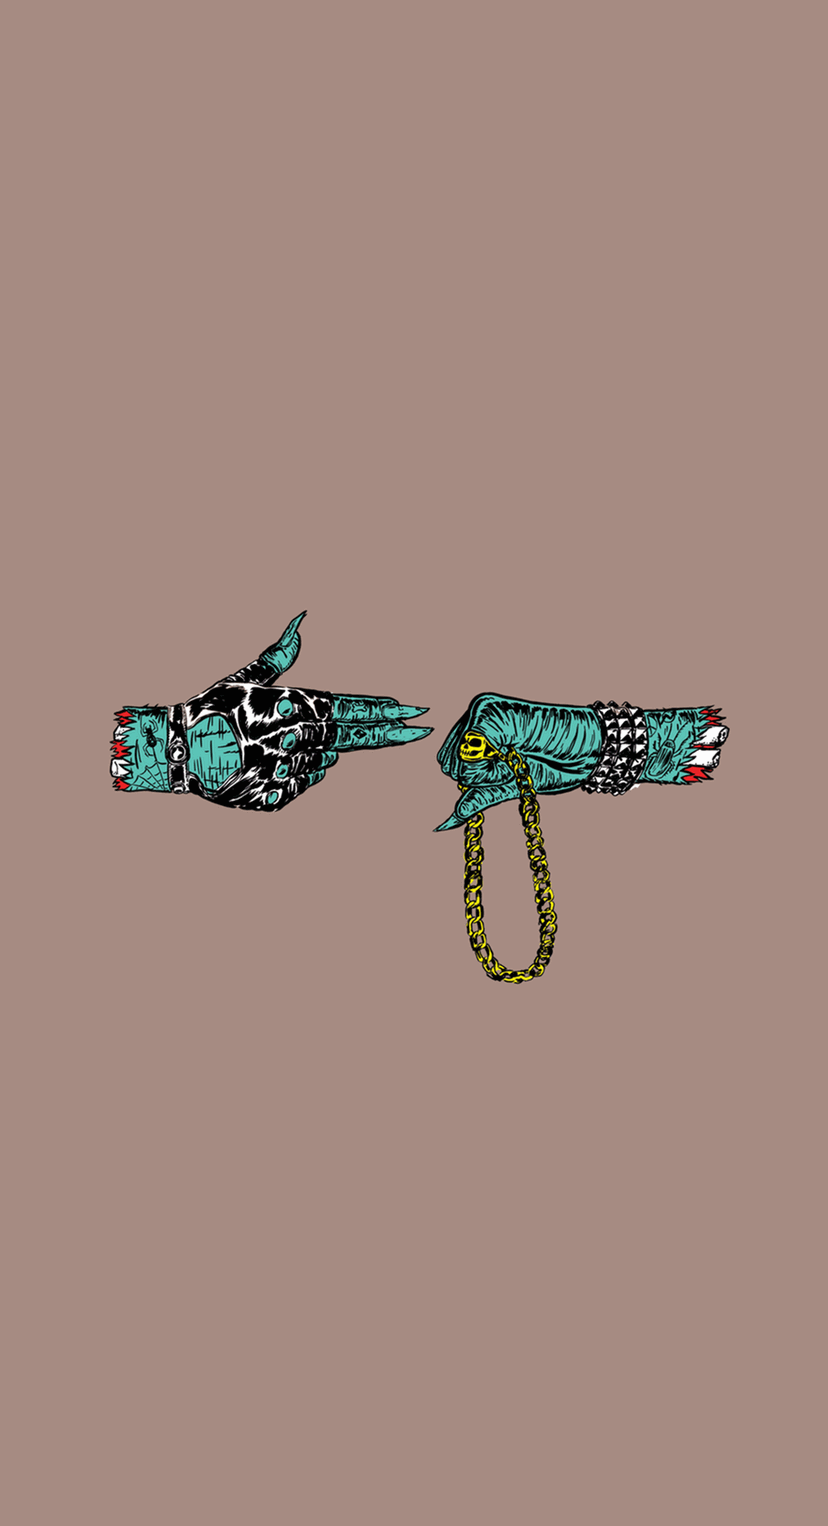 Free RTJ Desktop And Mobile Wallpaper Downloads The Jewels